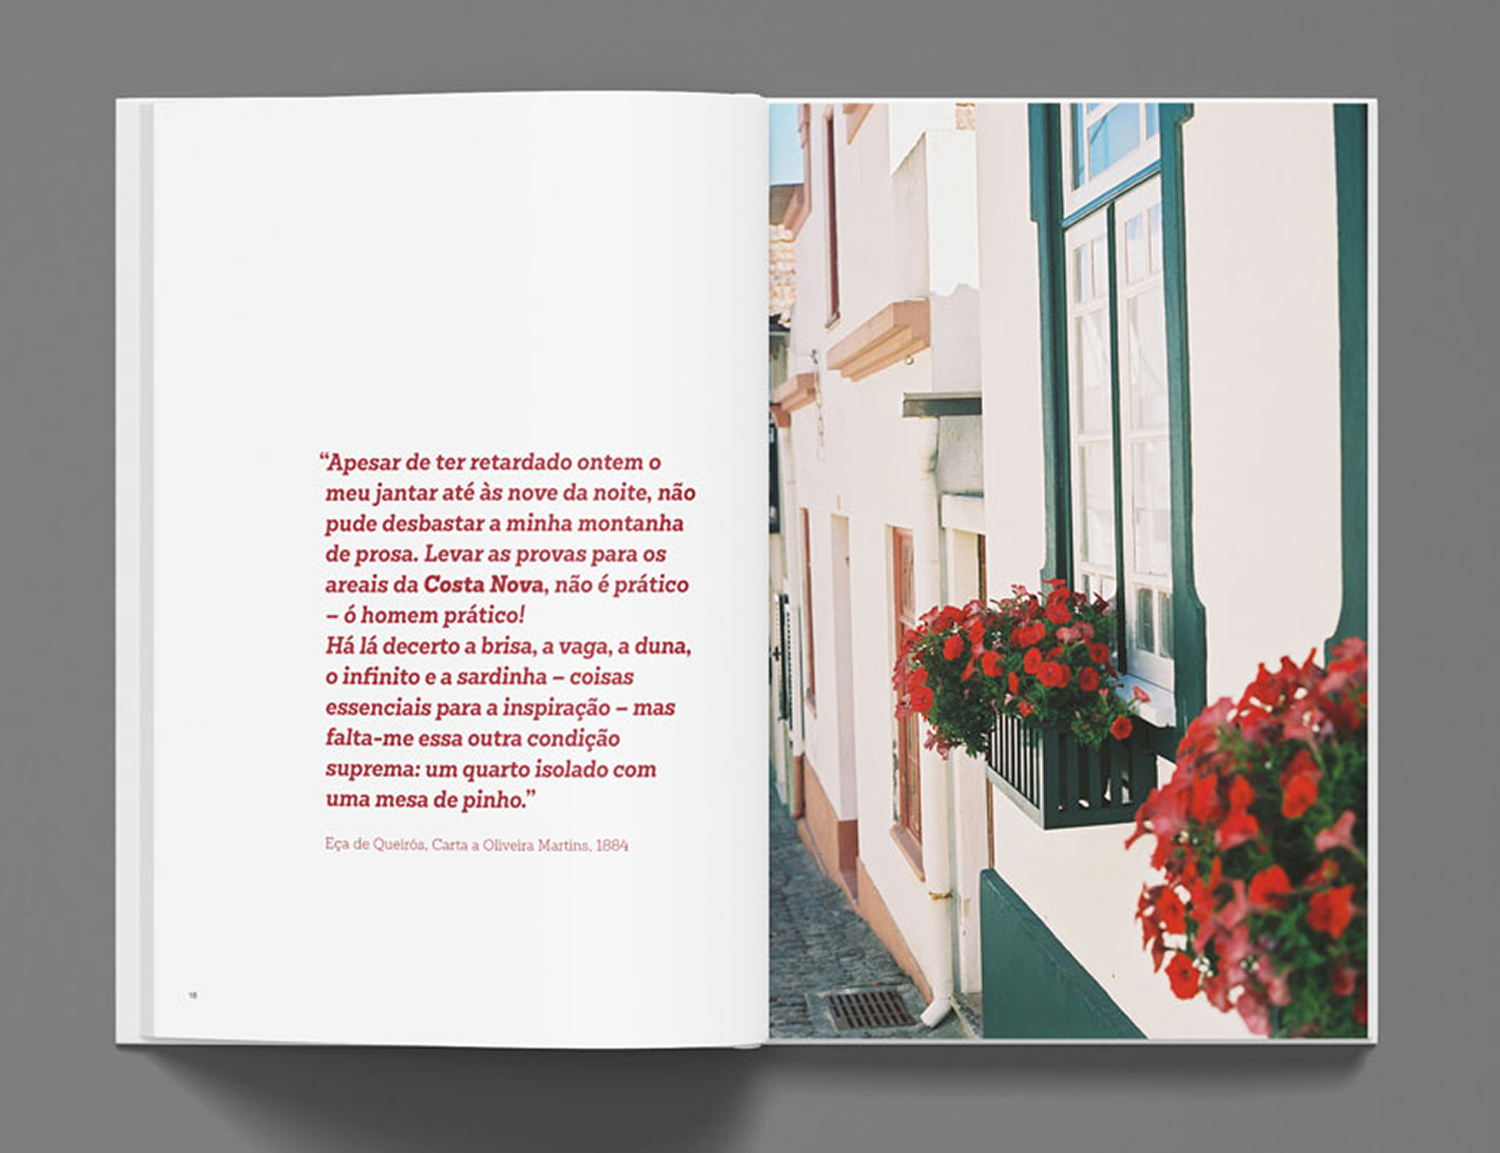 Spread of the book with text and a photo of the typical colorful houses in Costa Nova.